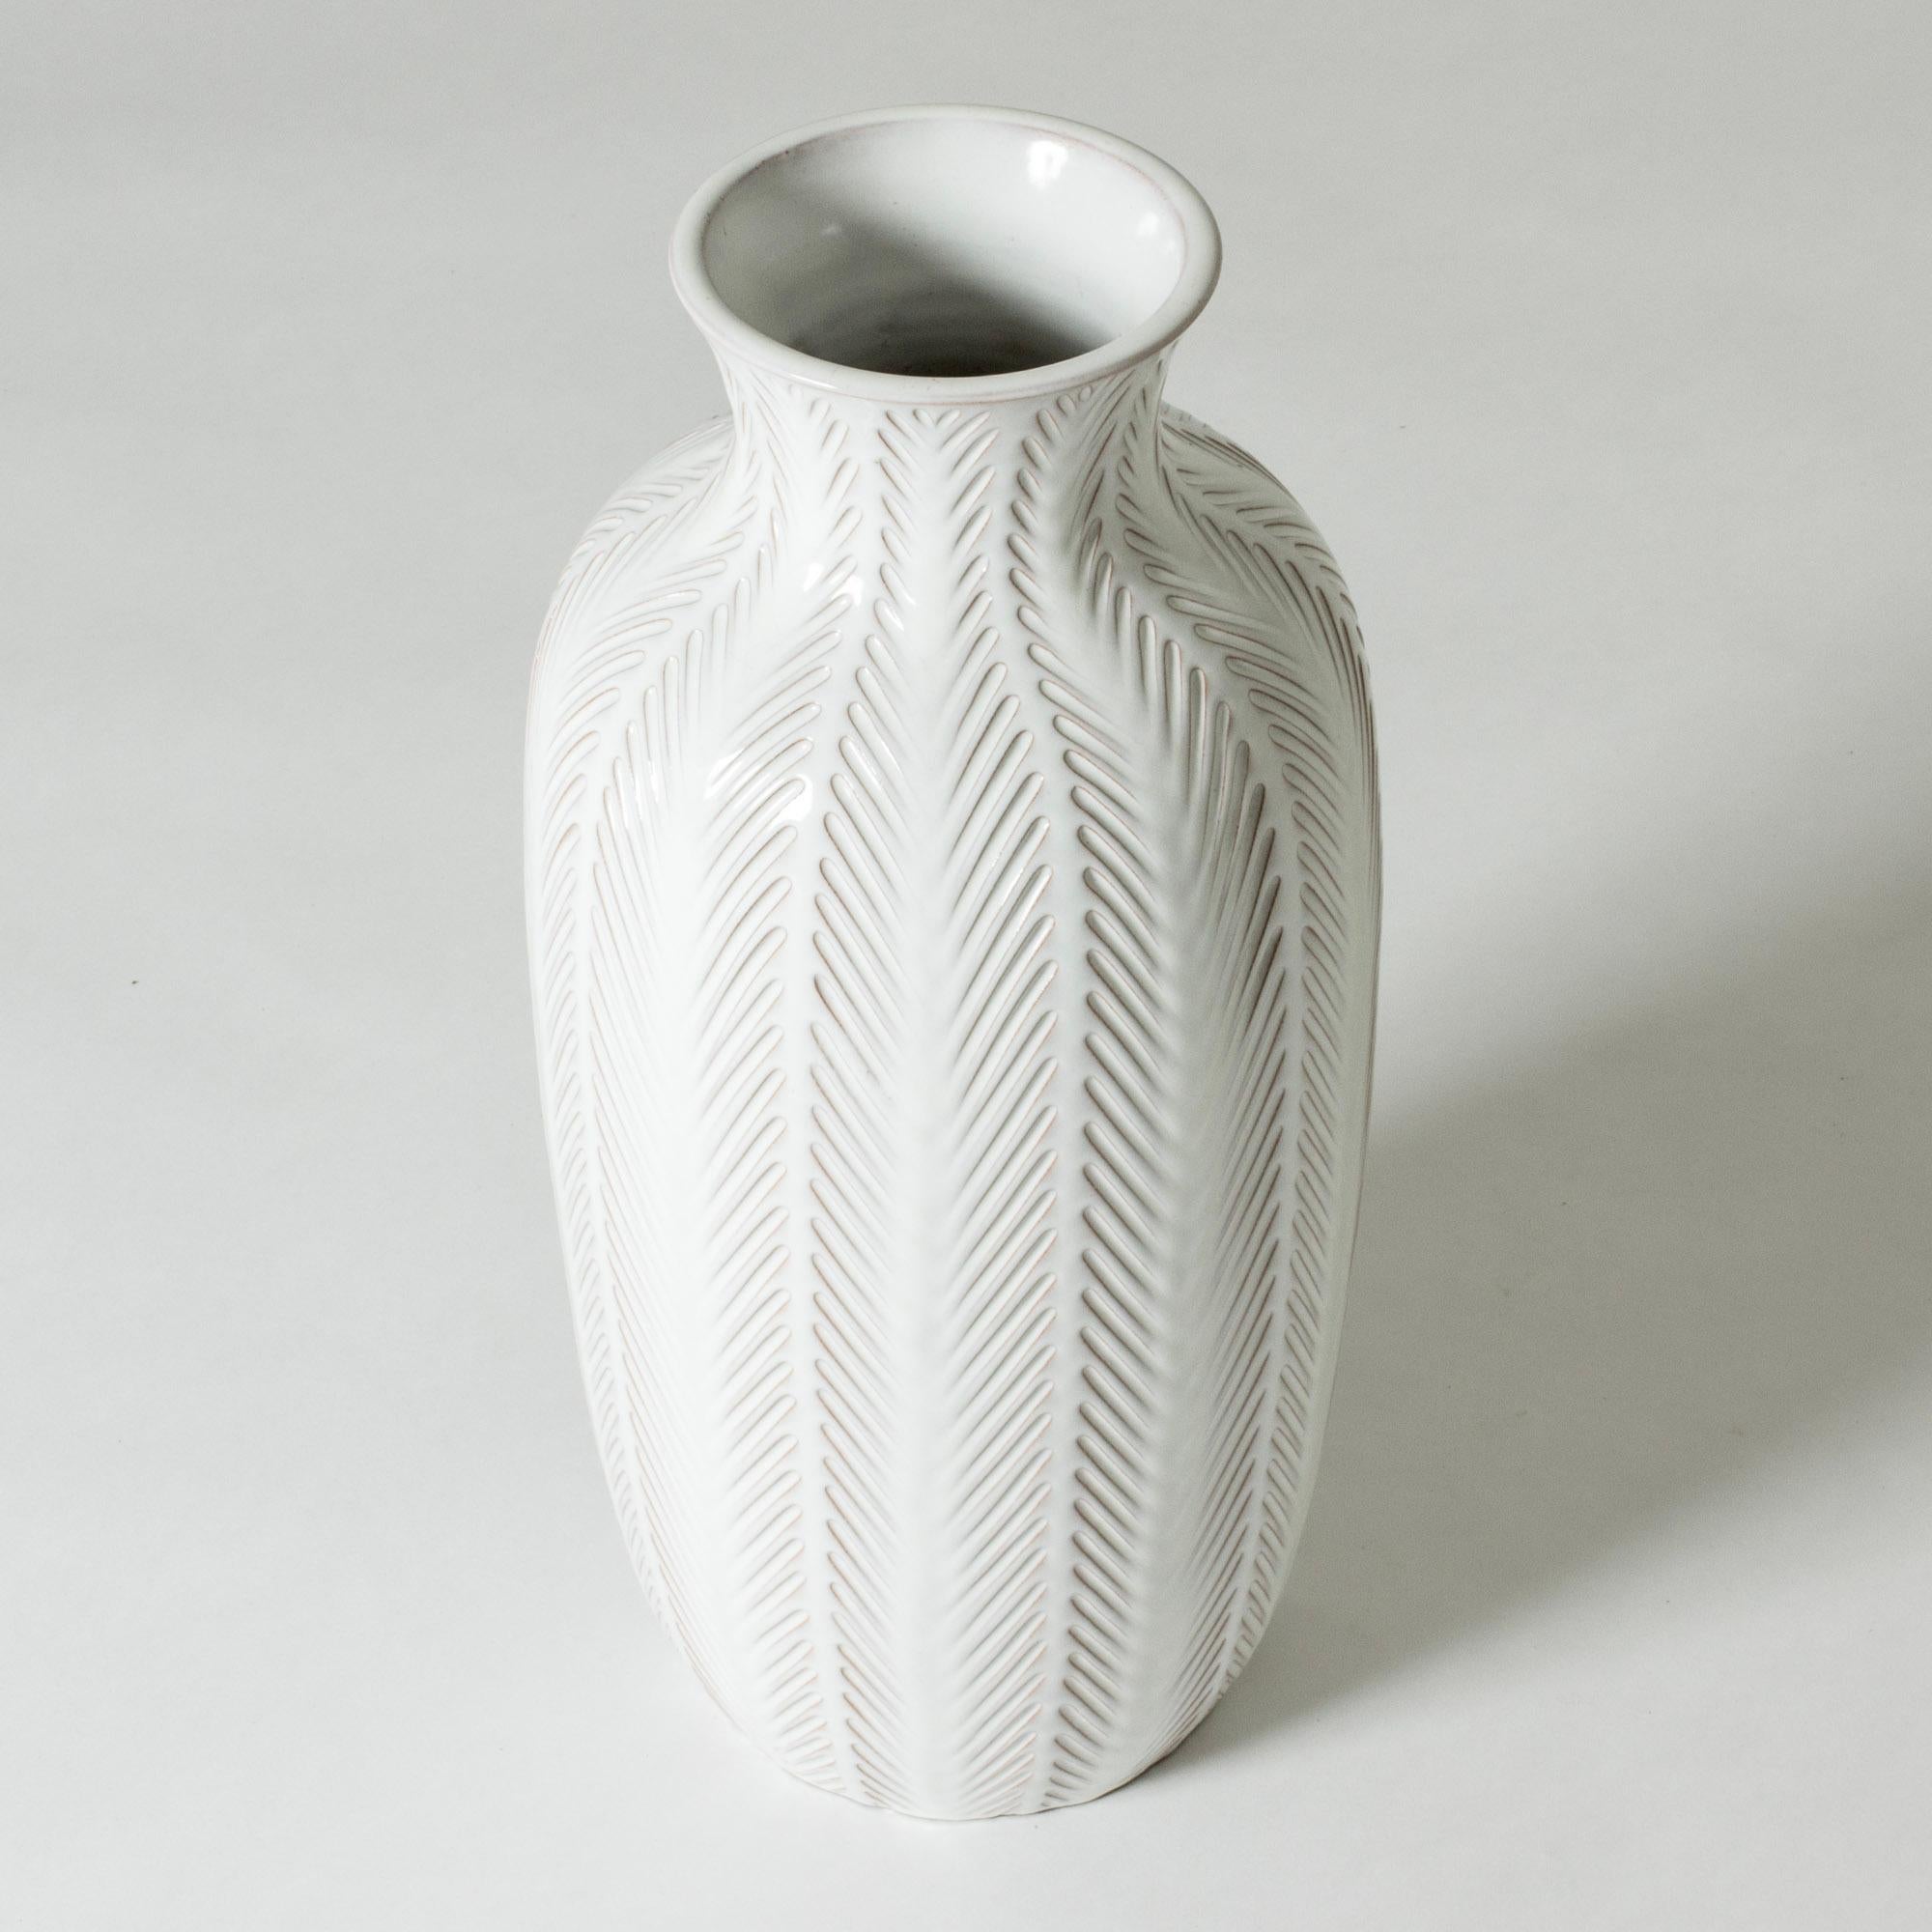 Beautiful stoneware floor vase by Anna-Lisa Thomson, glazed white. Decorative embossed graphic pattern.

The artist Anna-Lisa Thomson is best known for her stoneware and earthenware for Upsala-Ekeby where she worked from the mid 1930s until her